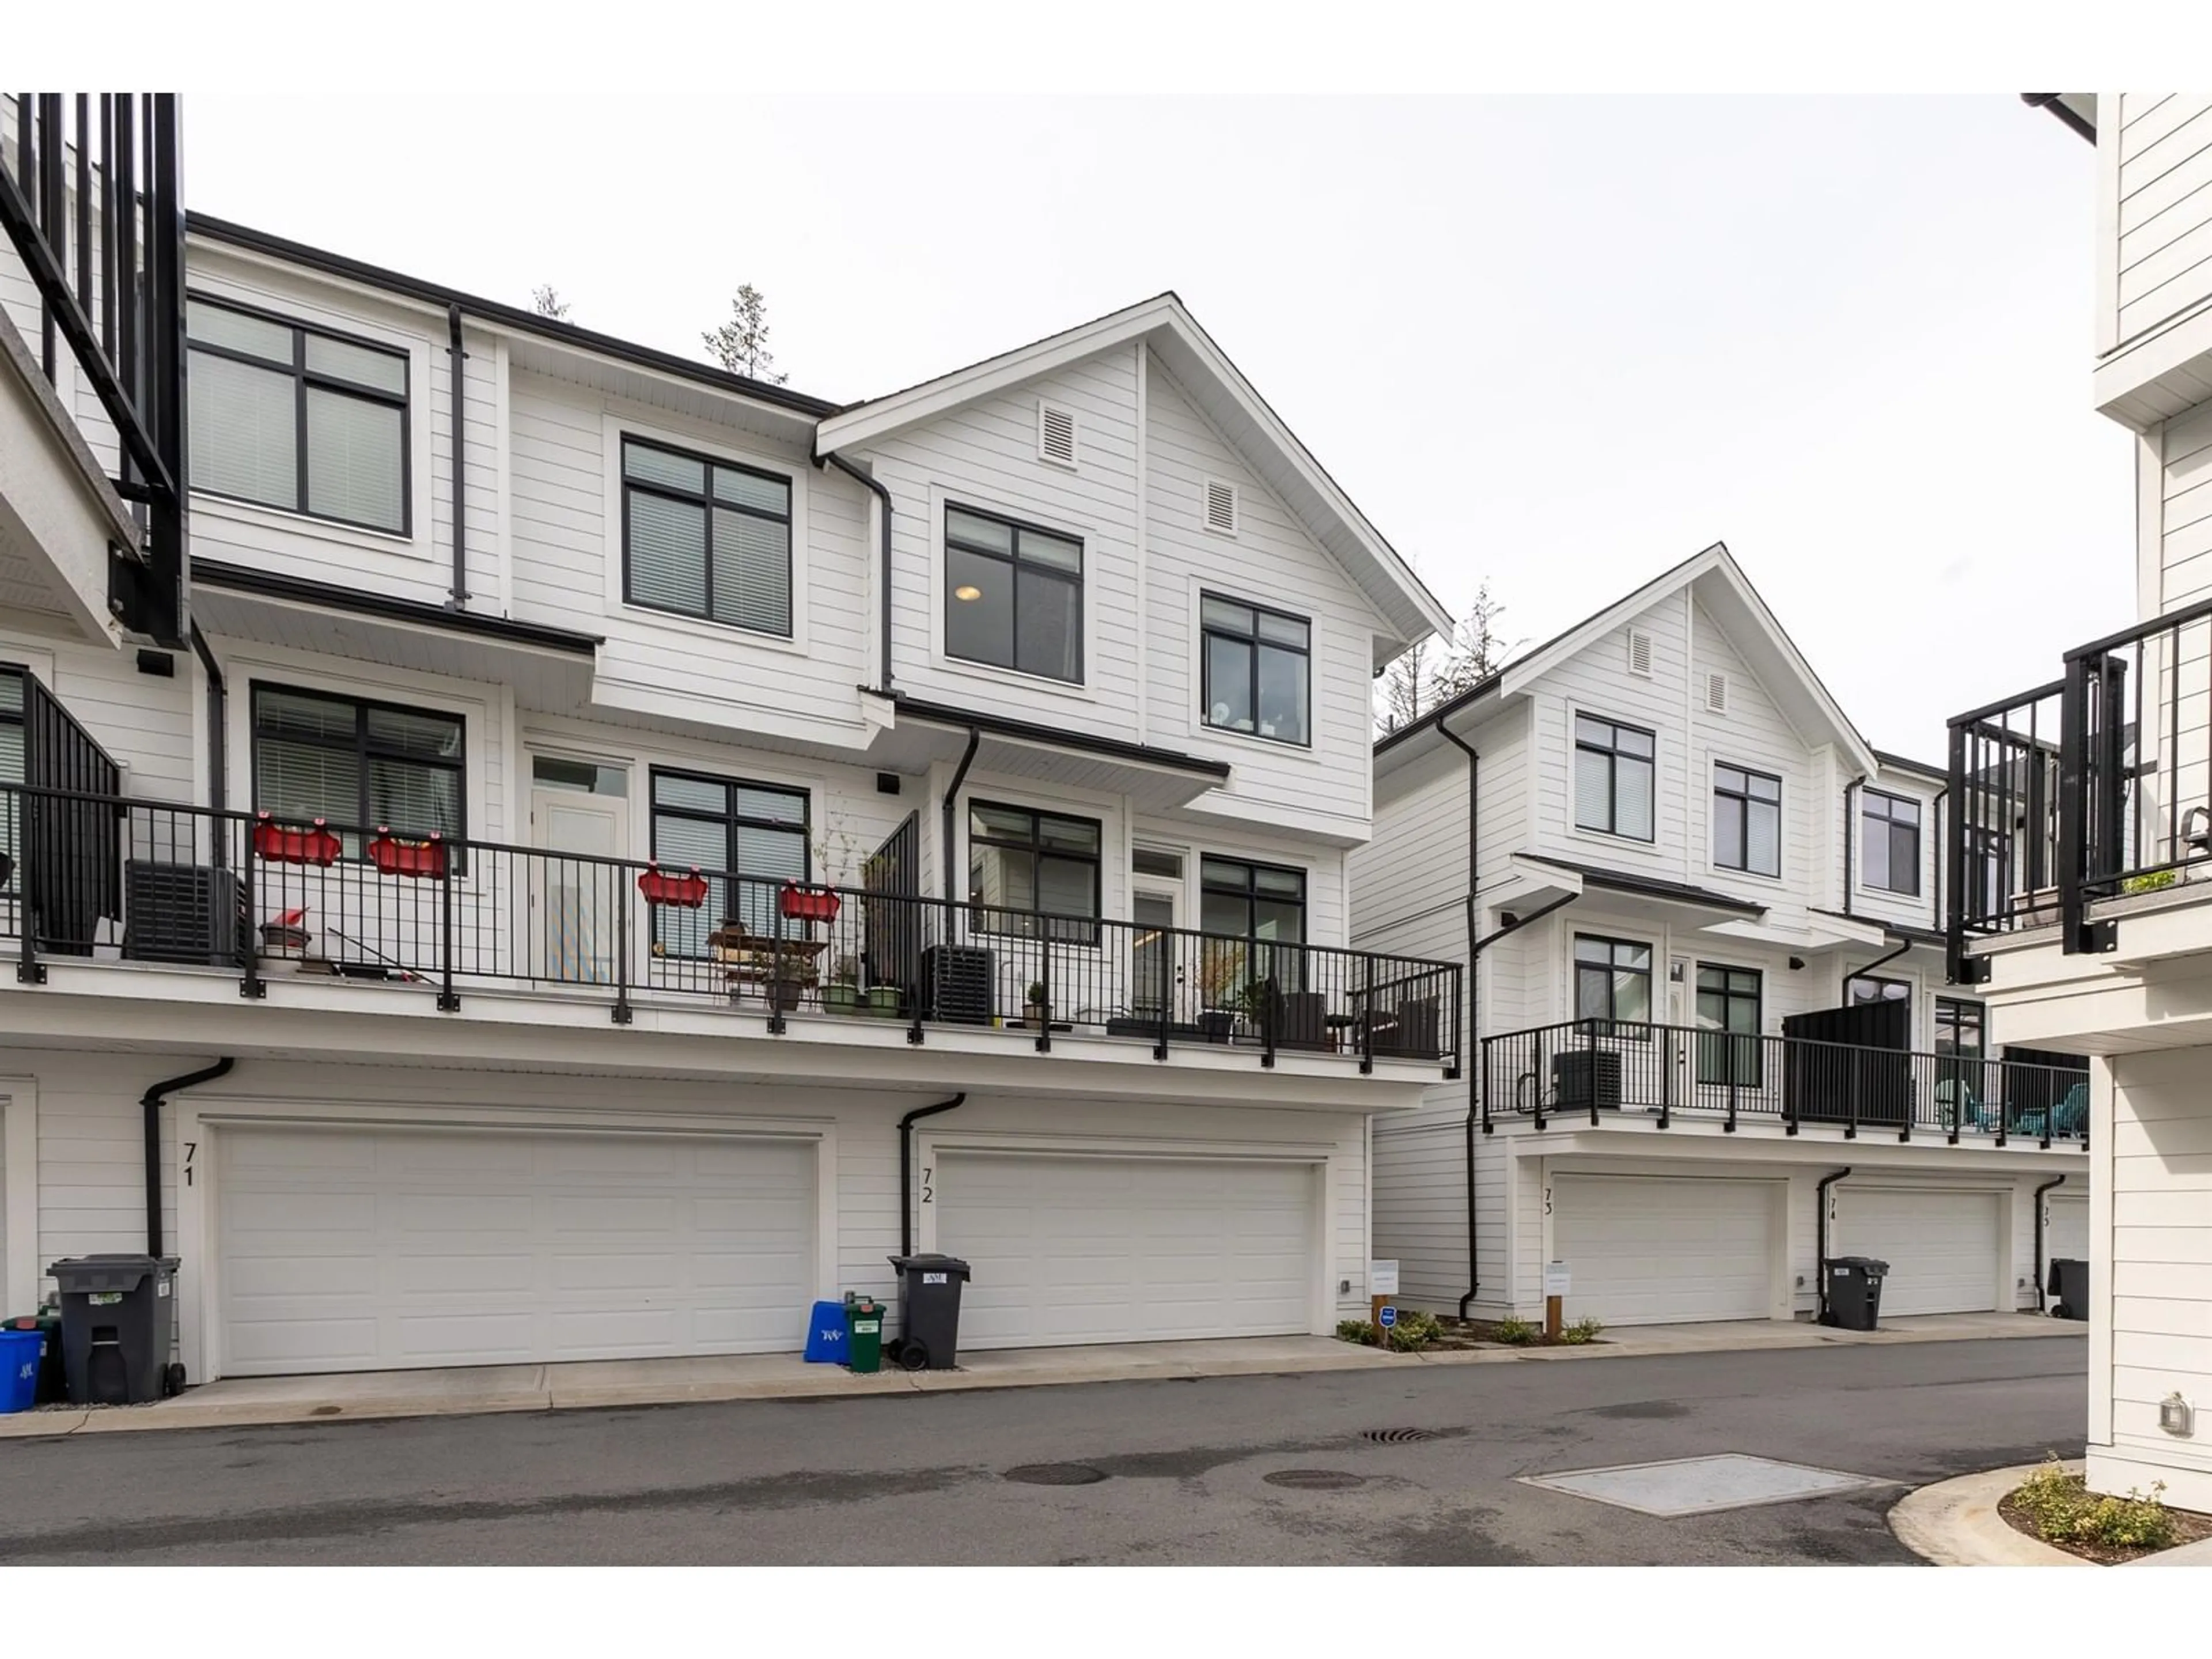 A pic from exterior of the house or condo for 72 17557 100 AVENUE, Surrey British Columbia V4N6V5